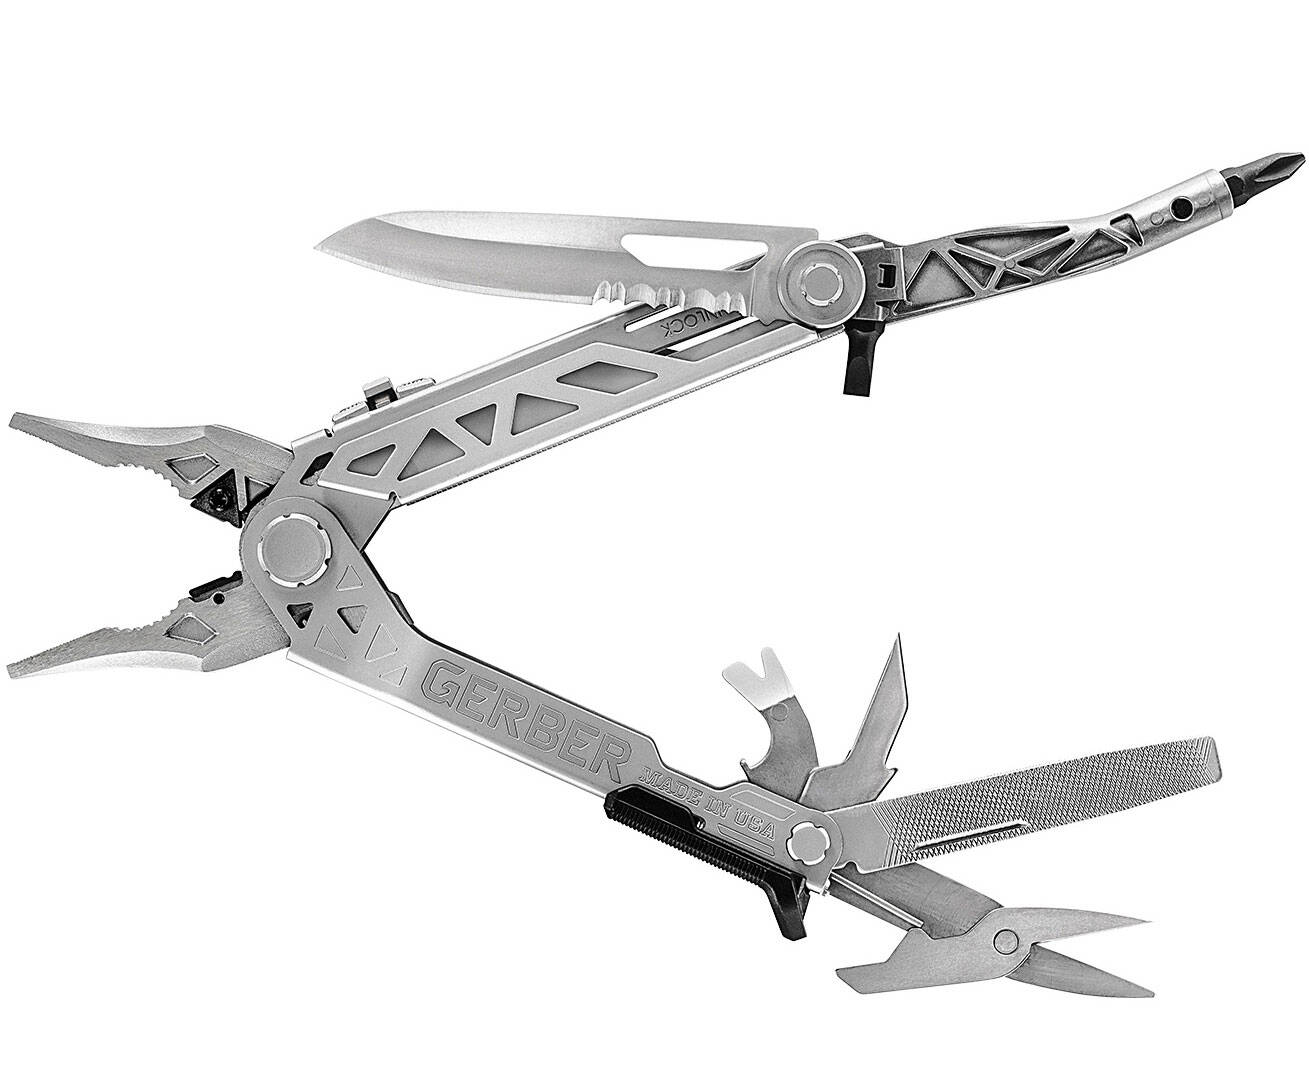 Gerber Center-Drive Multi-Tool - //coolthings.us